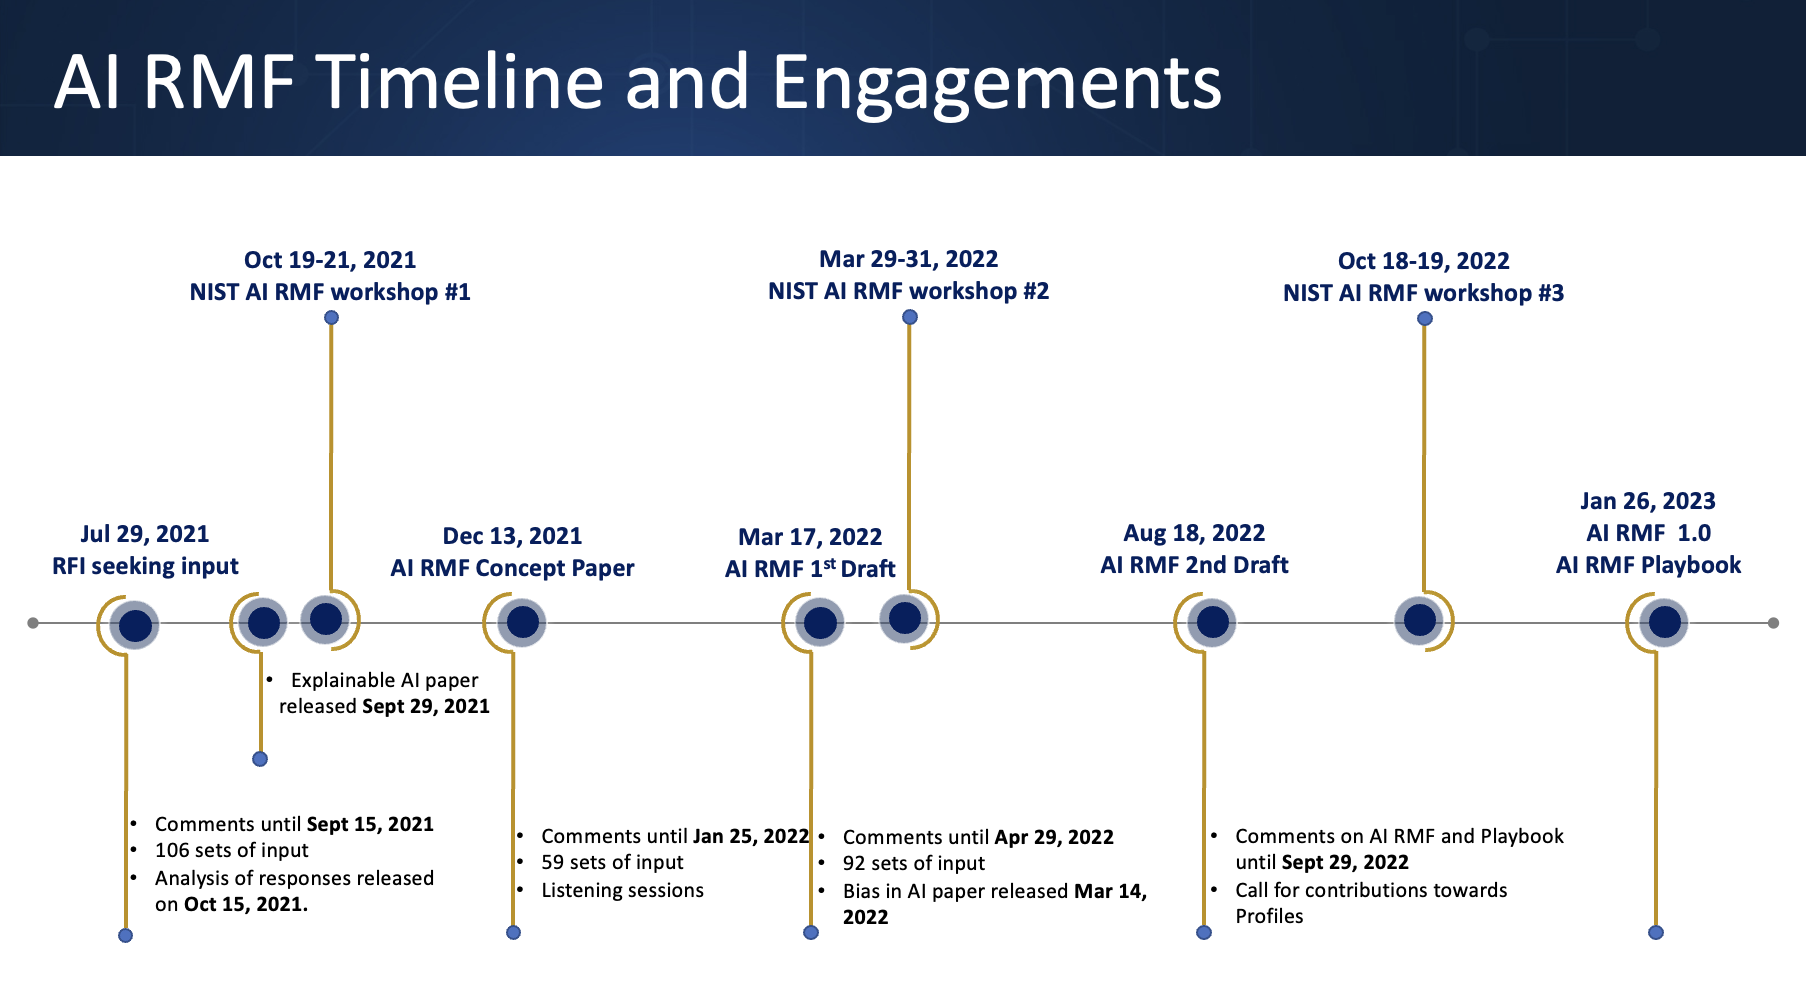 AI RMF Timeline and Engagements